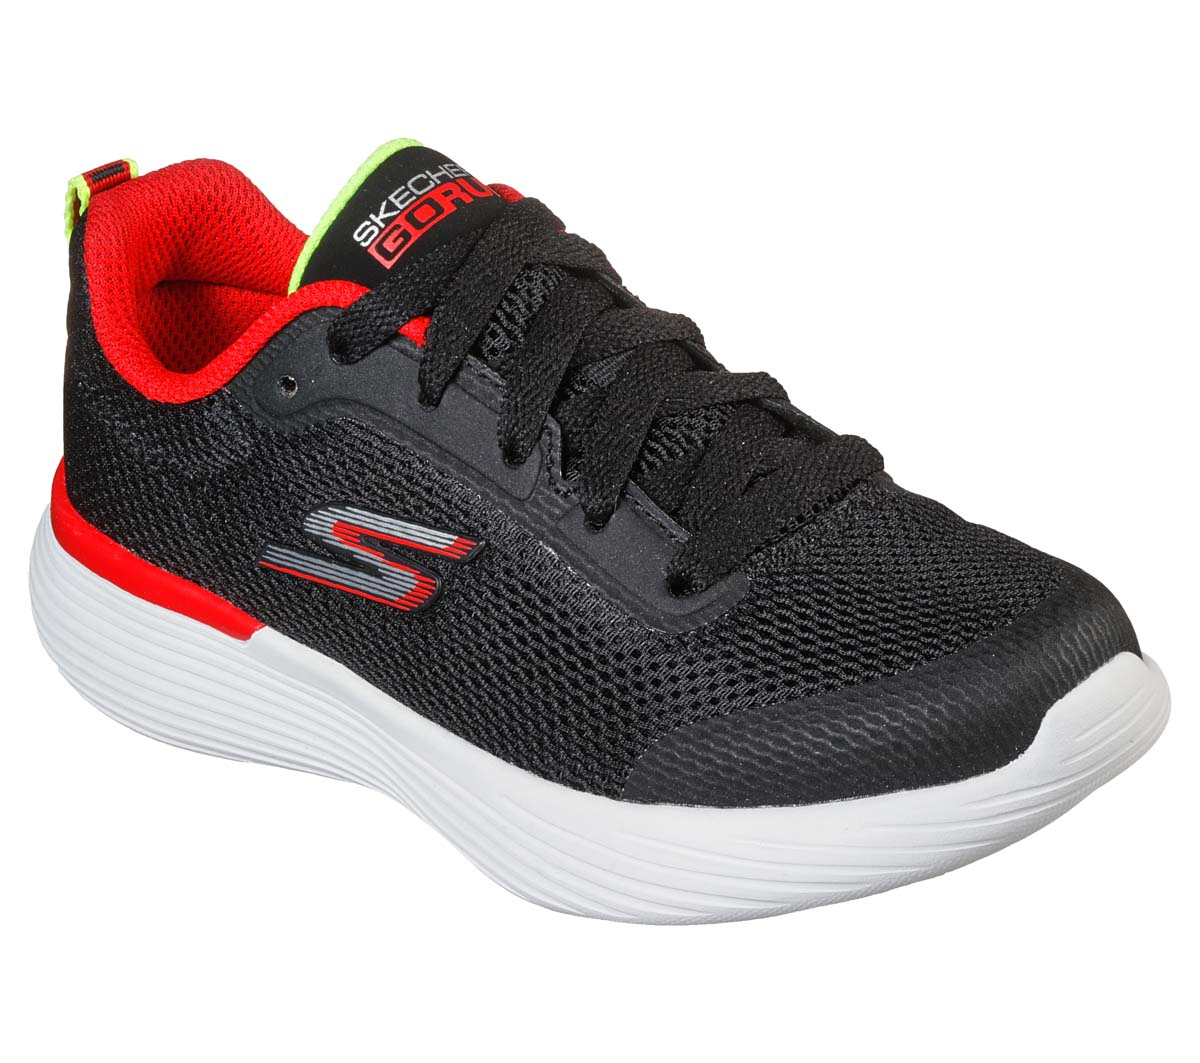 Skechers Go Run 400 Lace Black Red Kids Trainers 405100L In Size 36 In Plain Black Red For kids